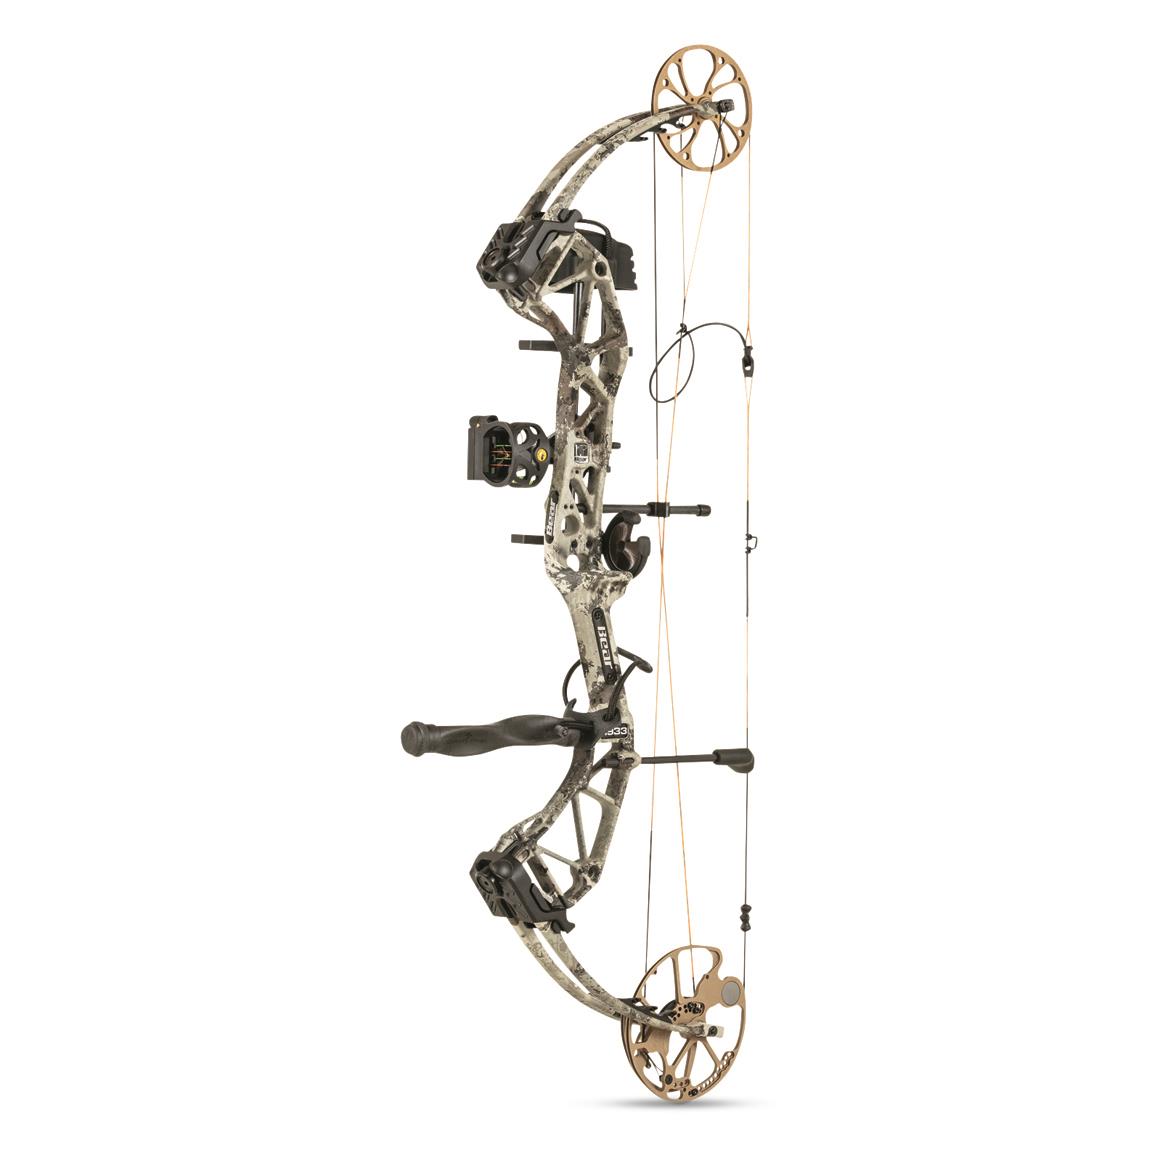 Ready-To-Shoot! PSE Razorback Recurve Bow Complete Package